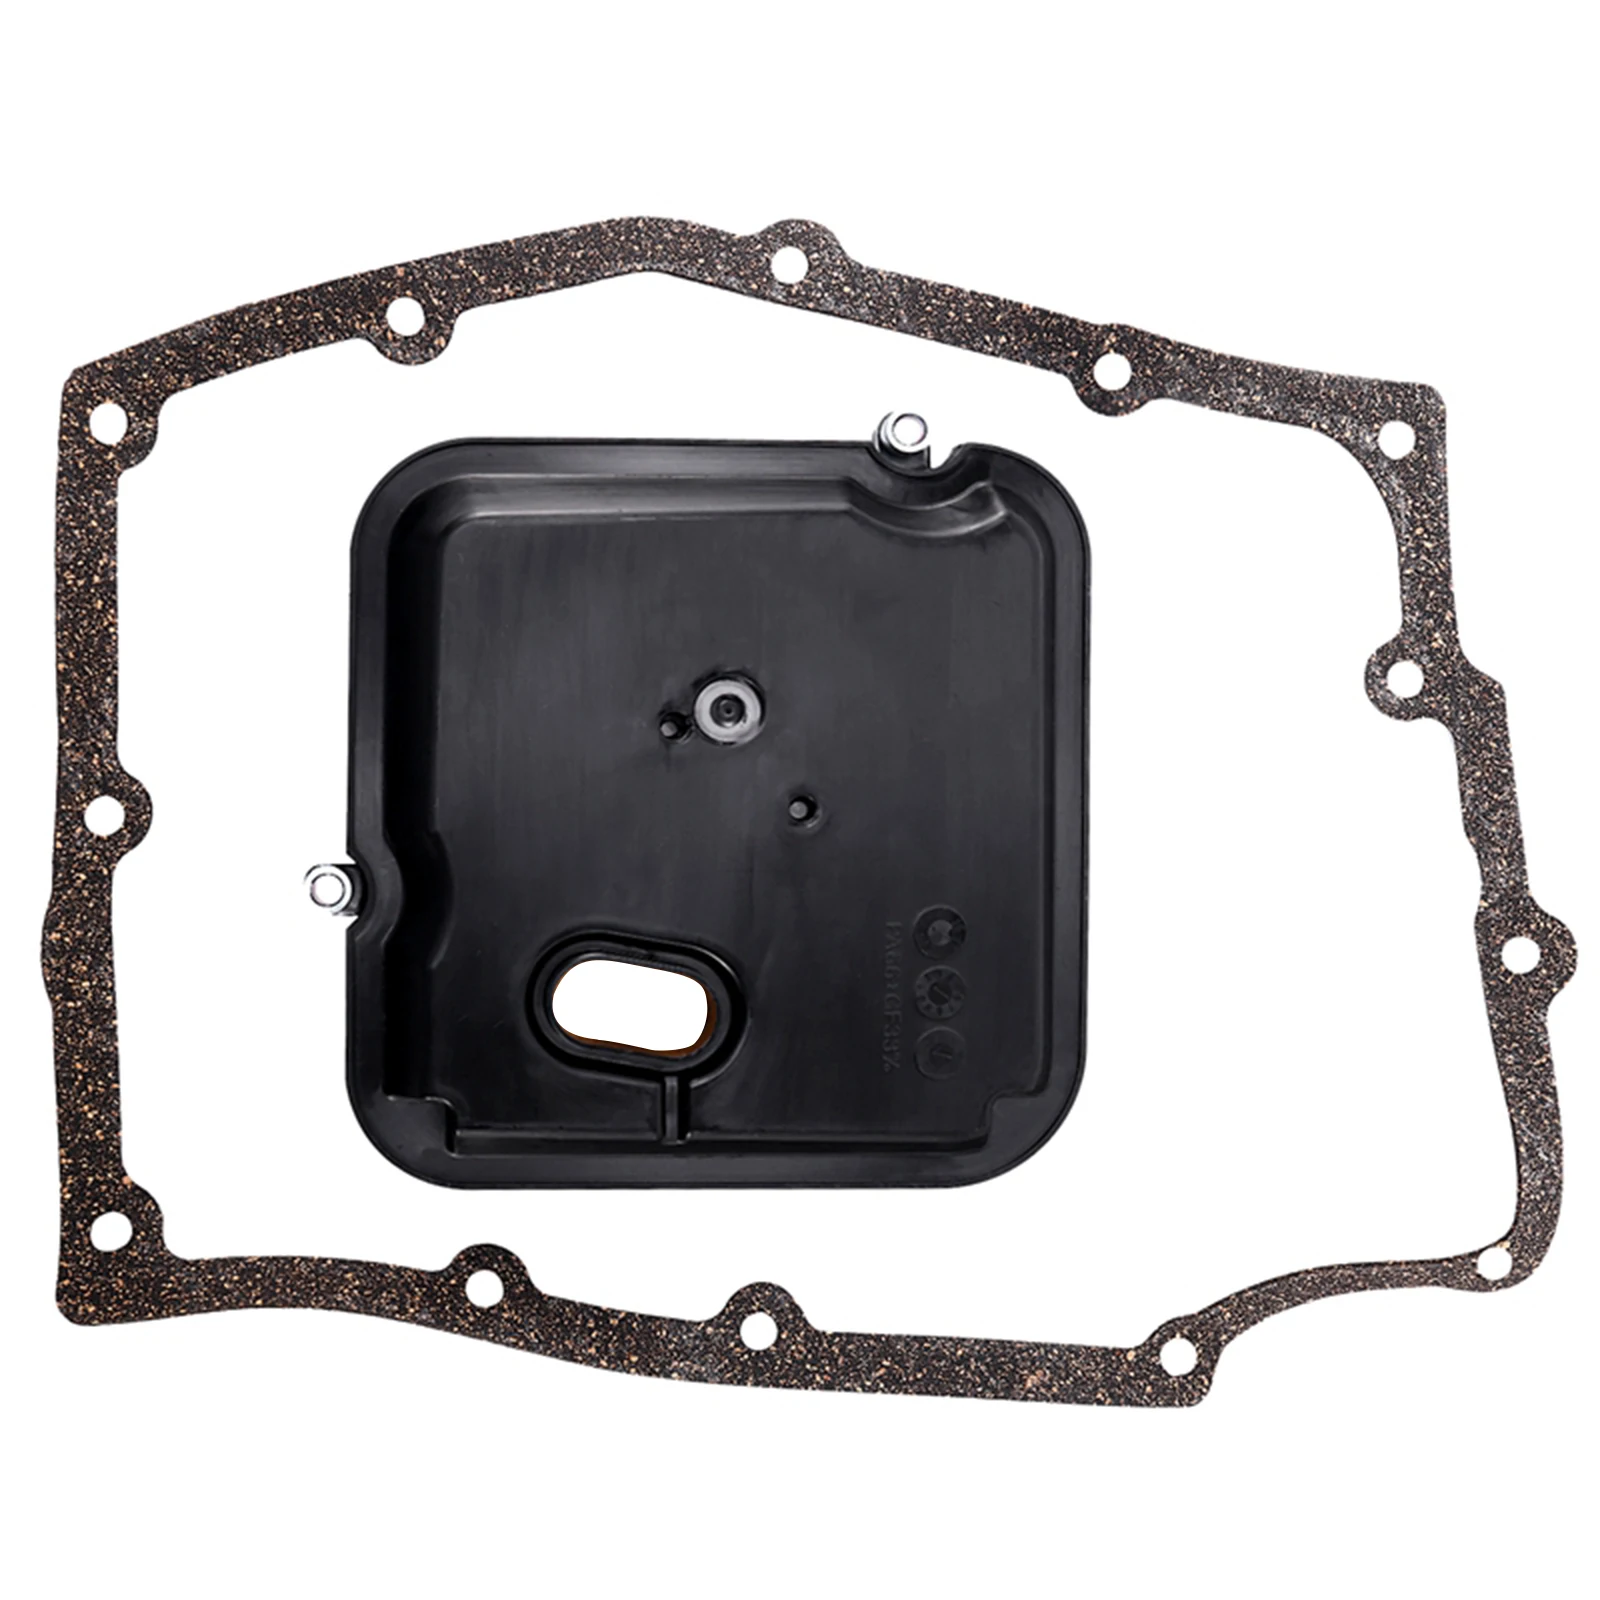 

OE: 52043248, 42rle Transmission New Filter Kit for 2003 and Above Dodge Chrysler Filter and Pan Gasket